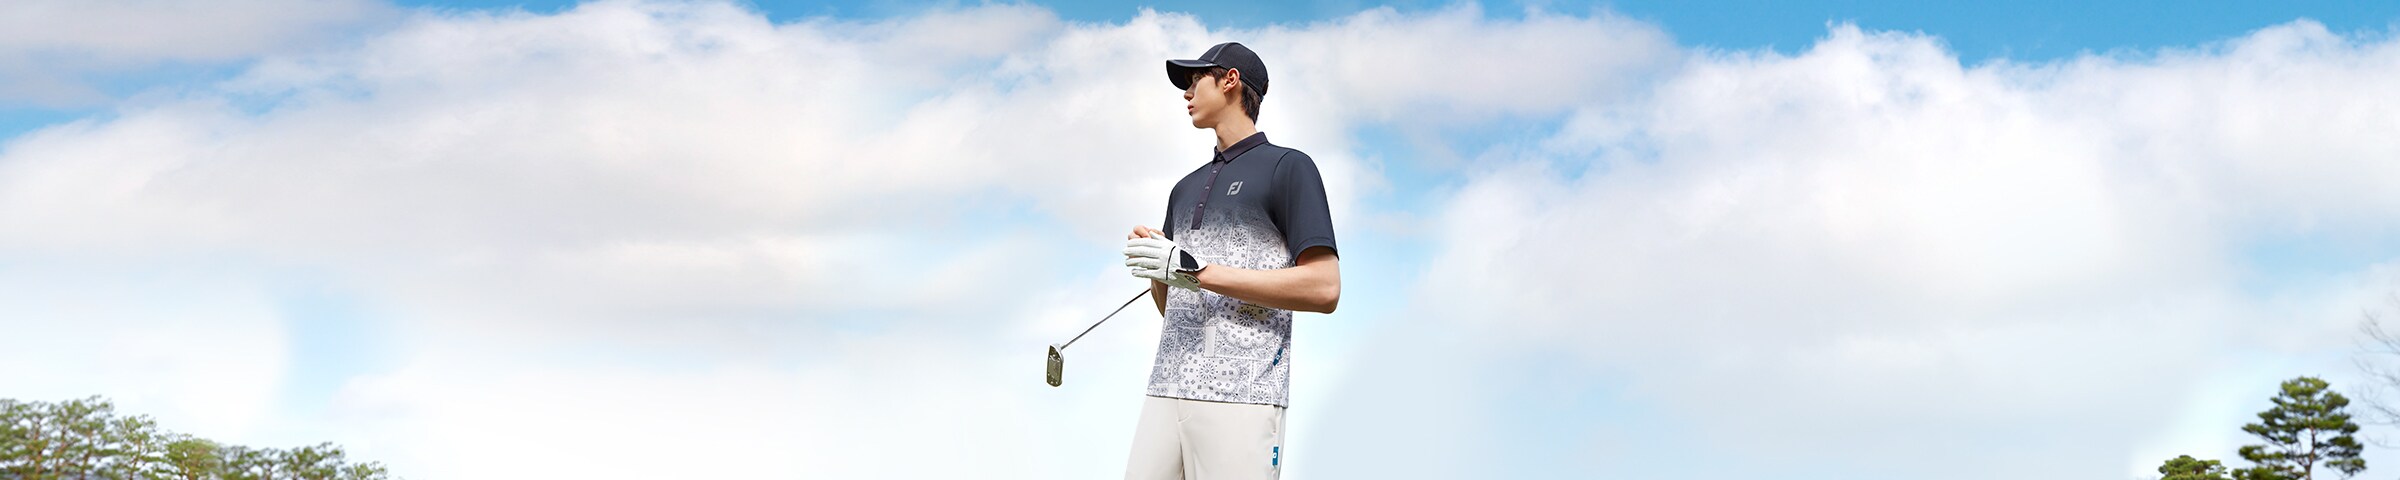 FootJoy Men's LikE Collection